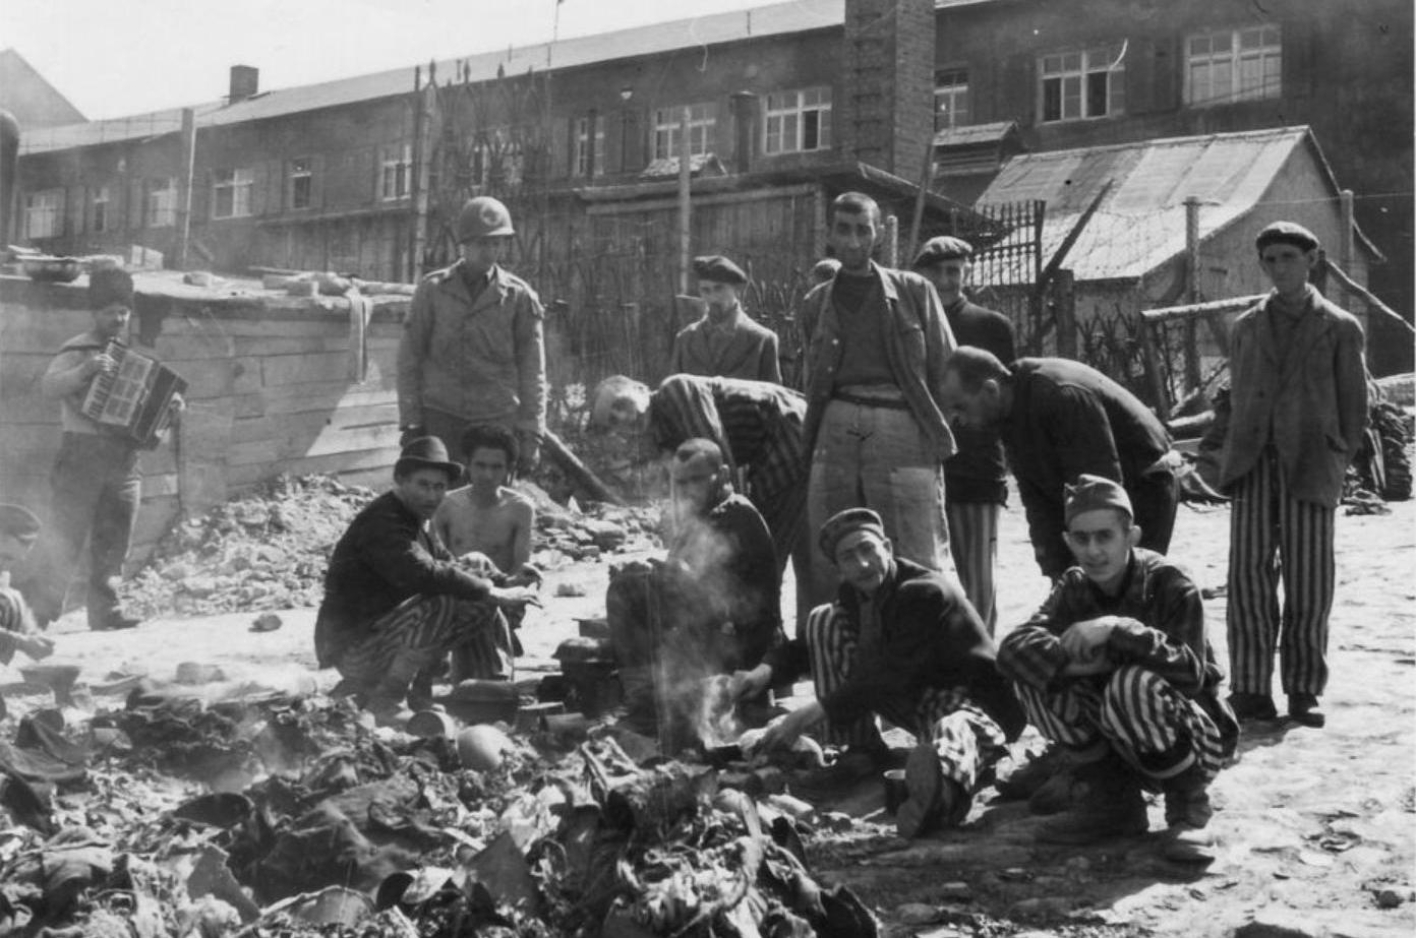 Surviving prisoners of the Small Camp cook a meal among rubble and debris. Five squat on the floor, five more stand. On the left stands a U.S. Army medic. Also, a man with an accordion leans against a wall.